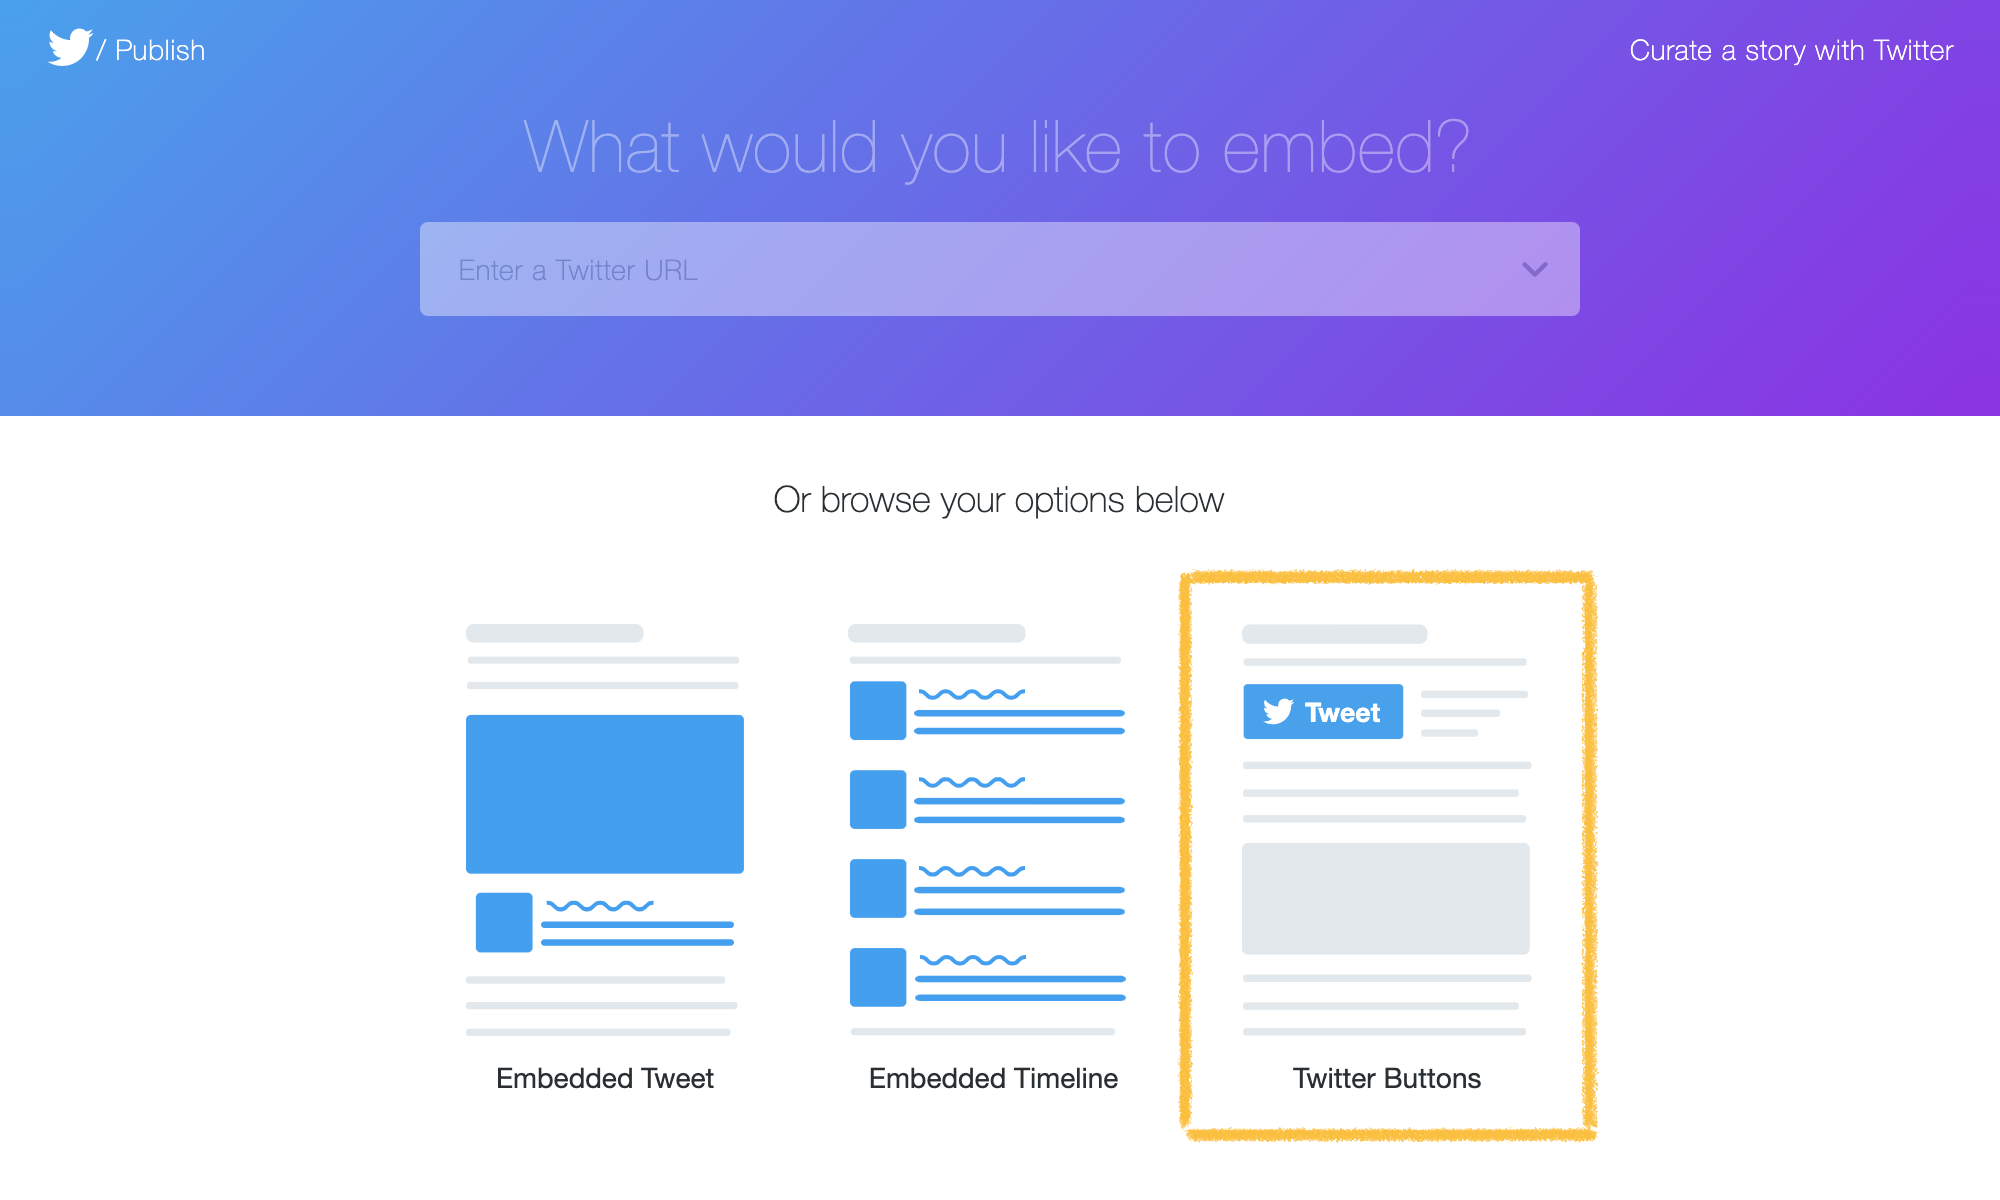 Twitter Publishのページから「Twitter Buttons」を選択